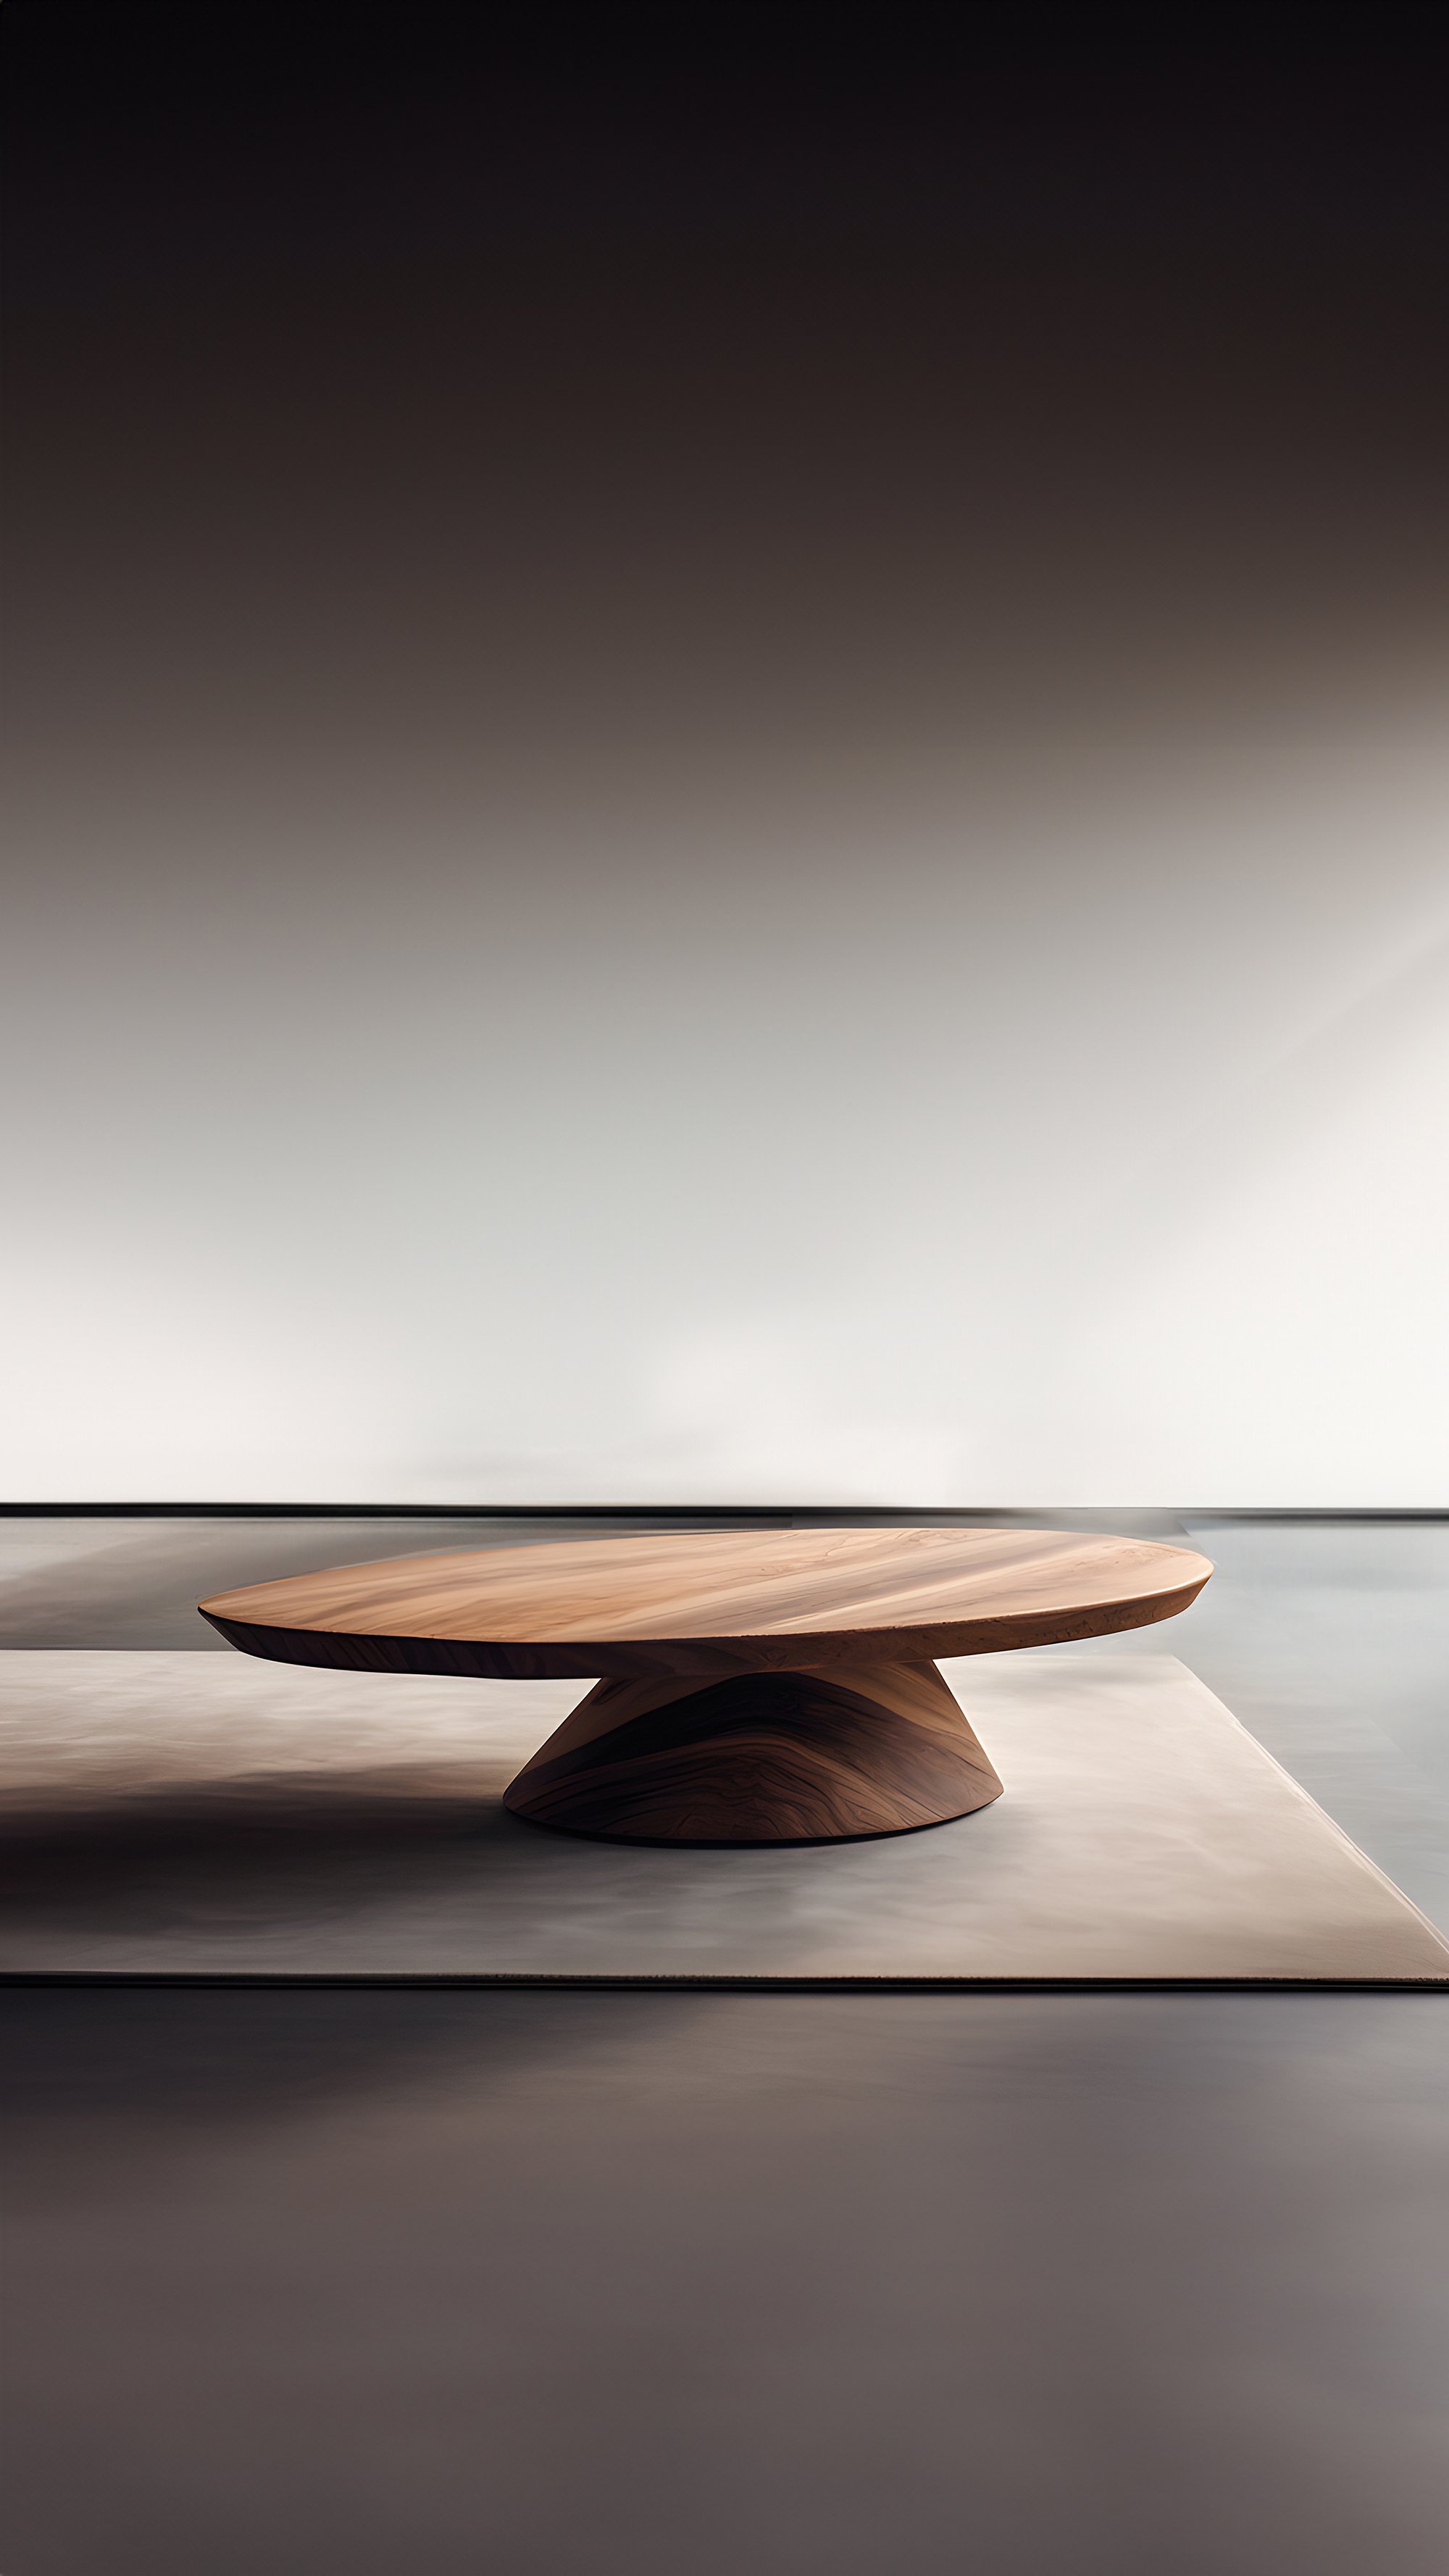 Sculptural Coffee Table Made of Solid Wood, Center Table Solace S47 by Joel Escalona — 9.jpg